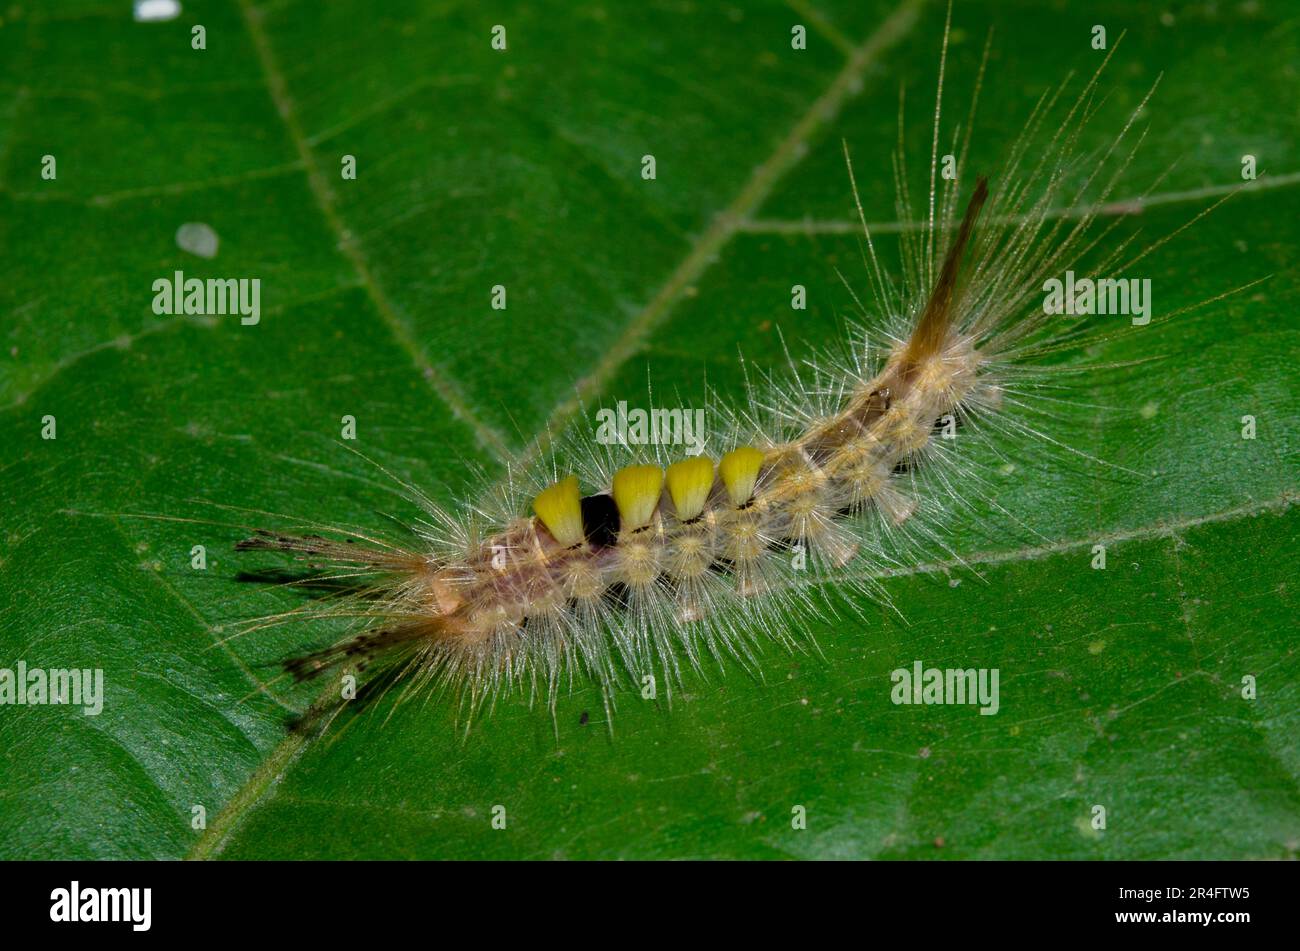 Tussock Moth Caterpillar, Lymantriidae Family, with long hairs for protection on leaf, Klungkung, Bali, Indonesia Stock Photo